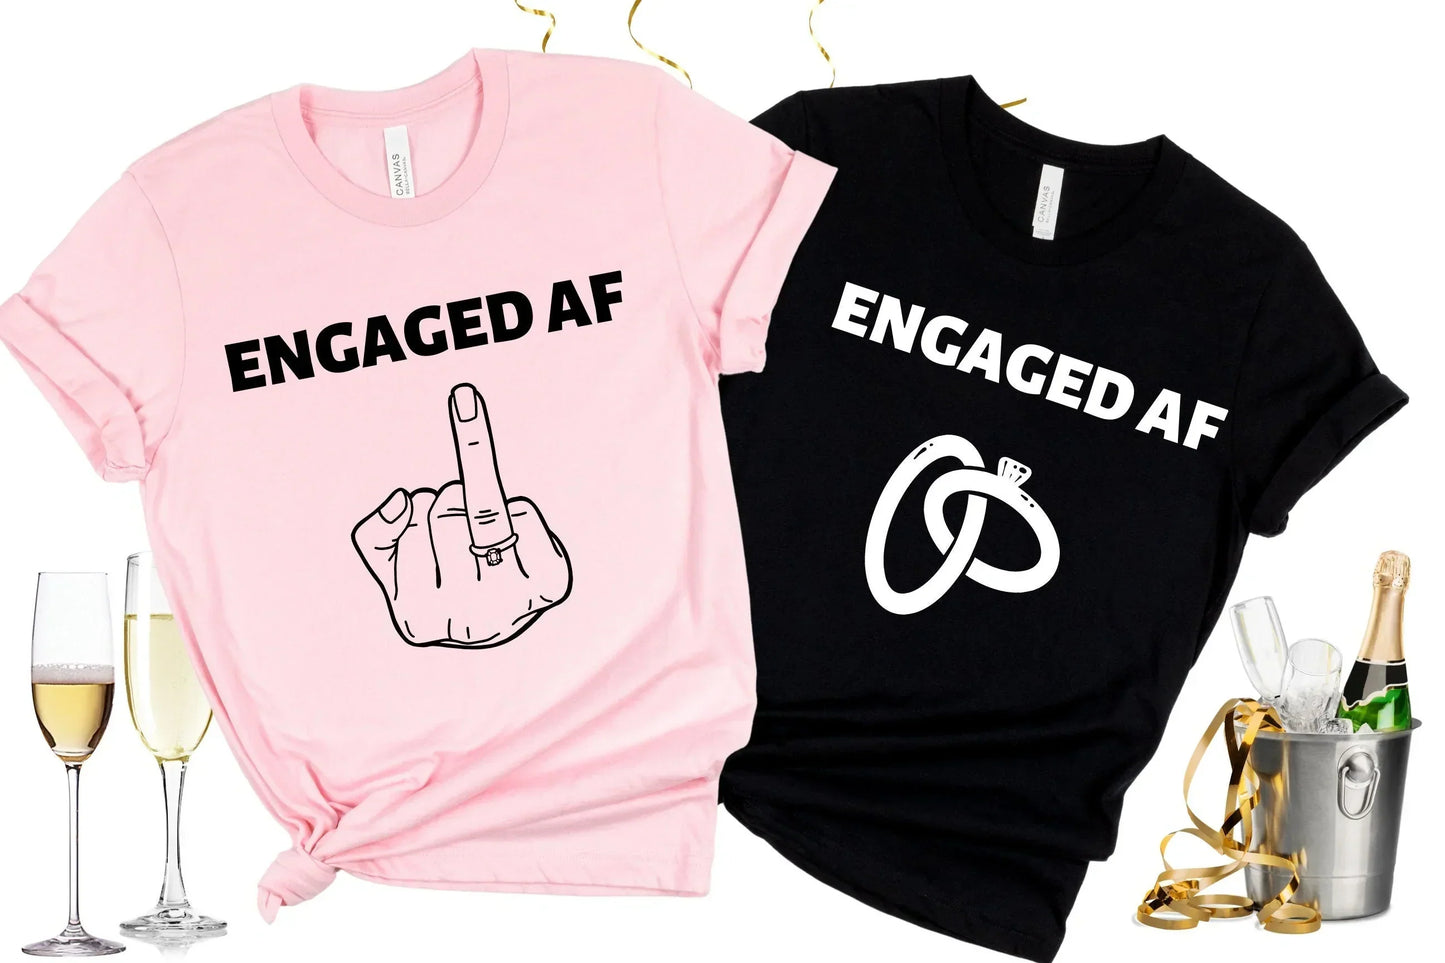 Engagement Shirt, Announcement Tee, Bachelorette Party Shirt, Bridal Shower Shirt, We're Engaged, Engaged Af Shirt, Couples Shirts HMDesignStudioUS